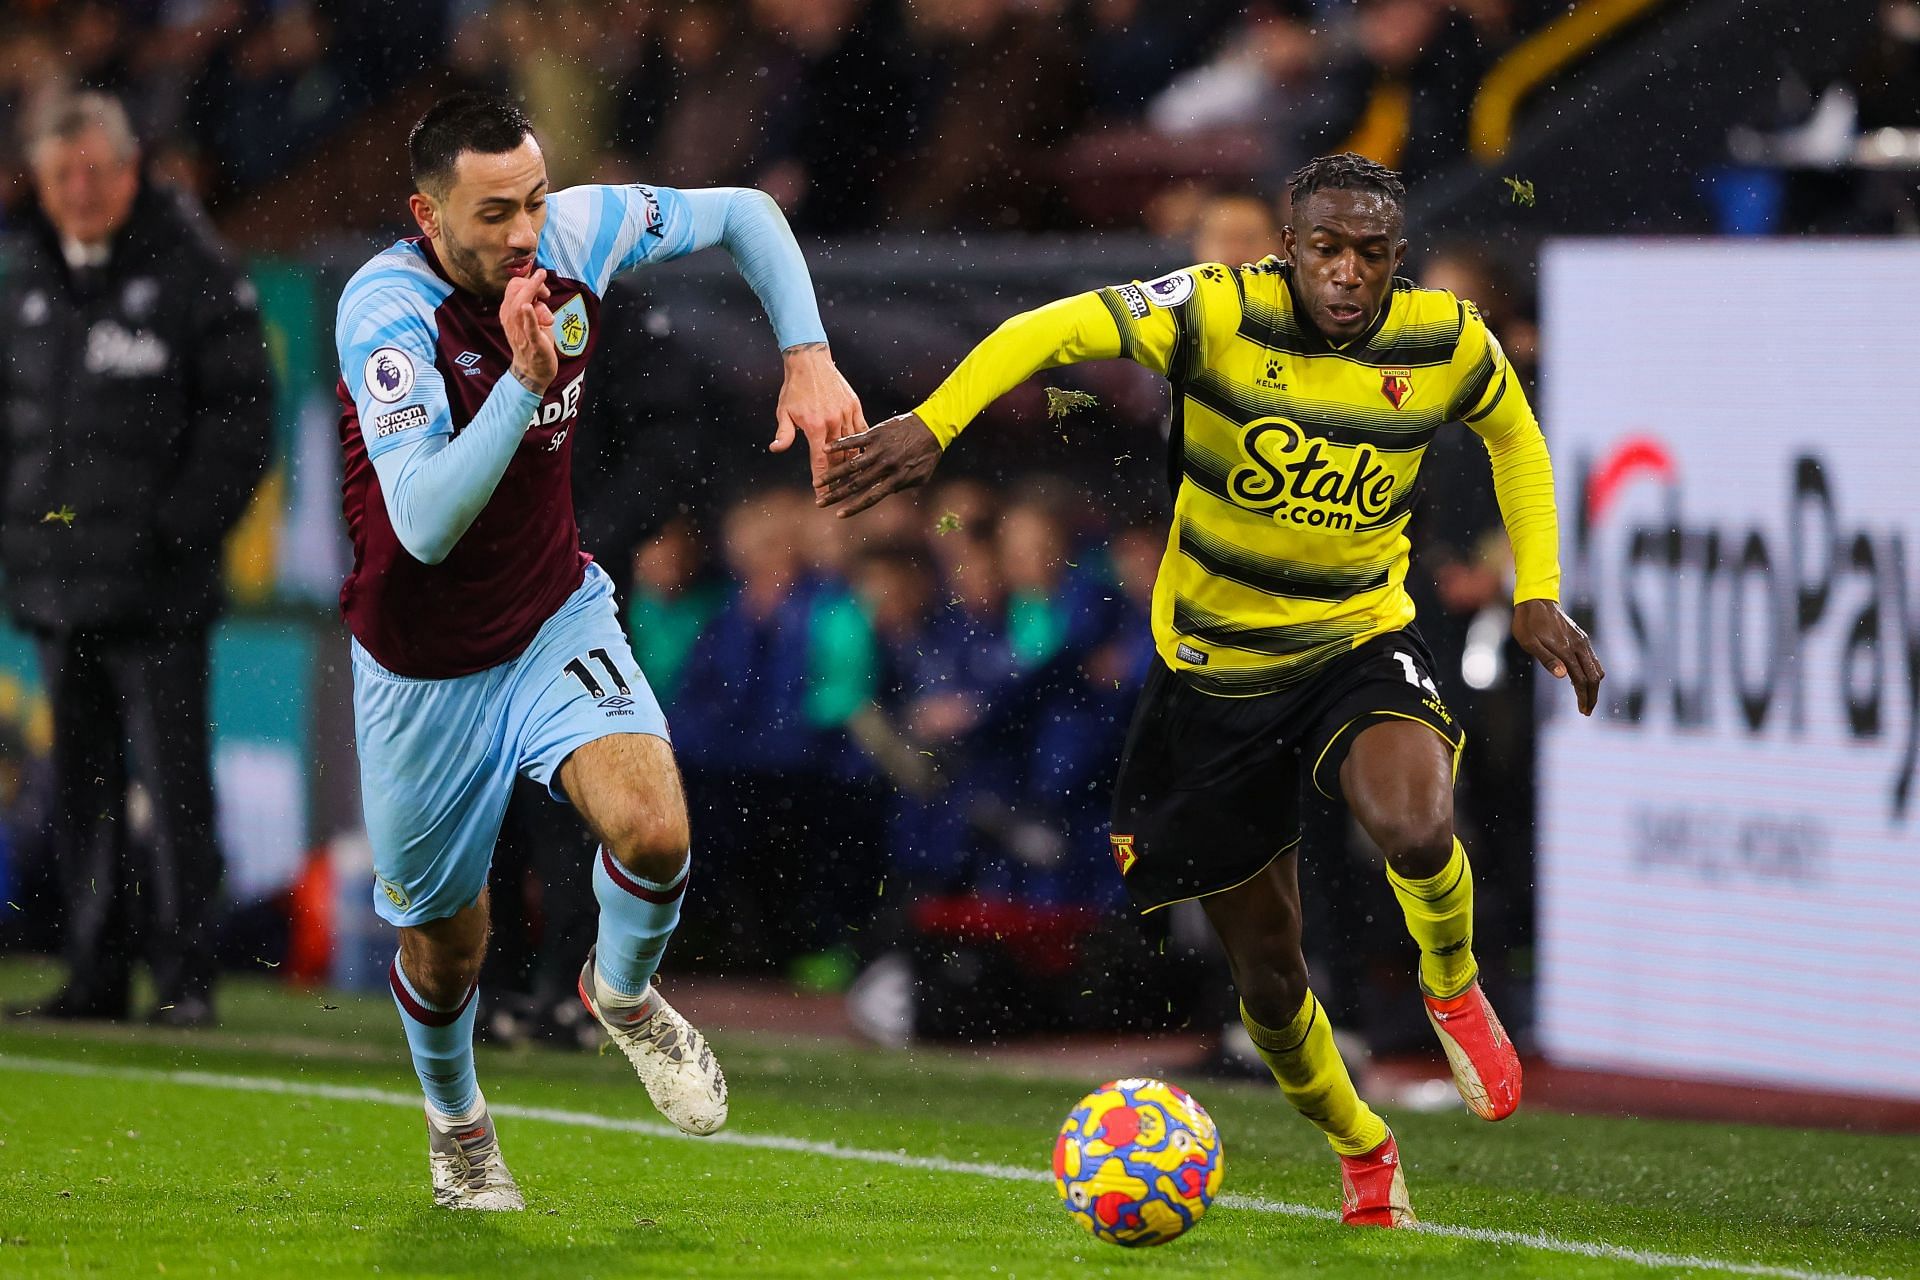 Watford play host to Burnley on Saturday.